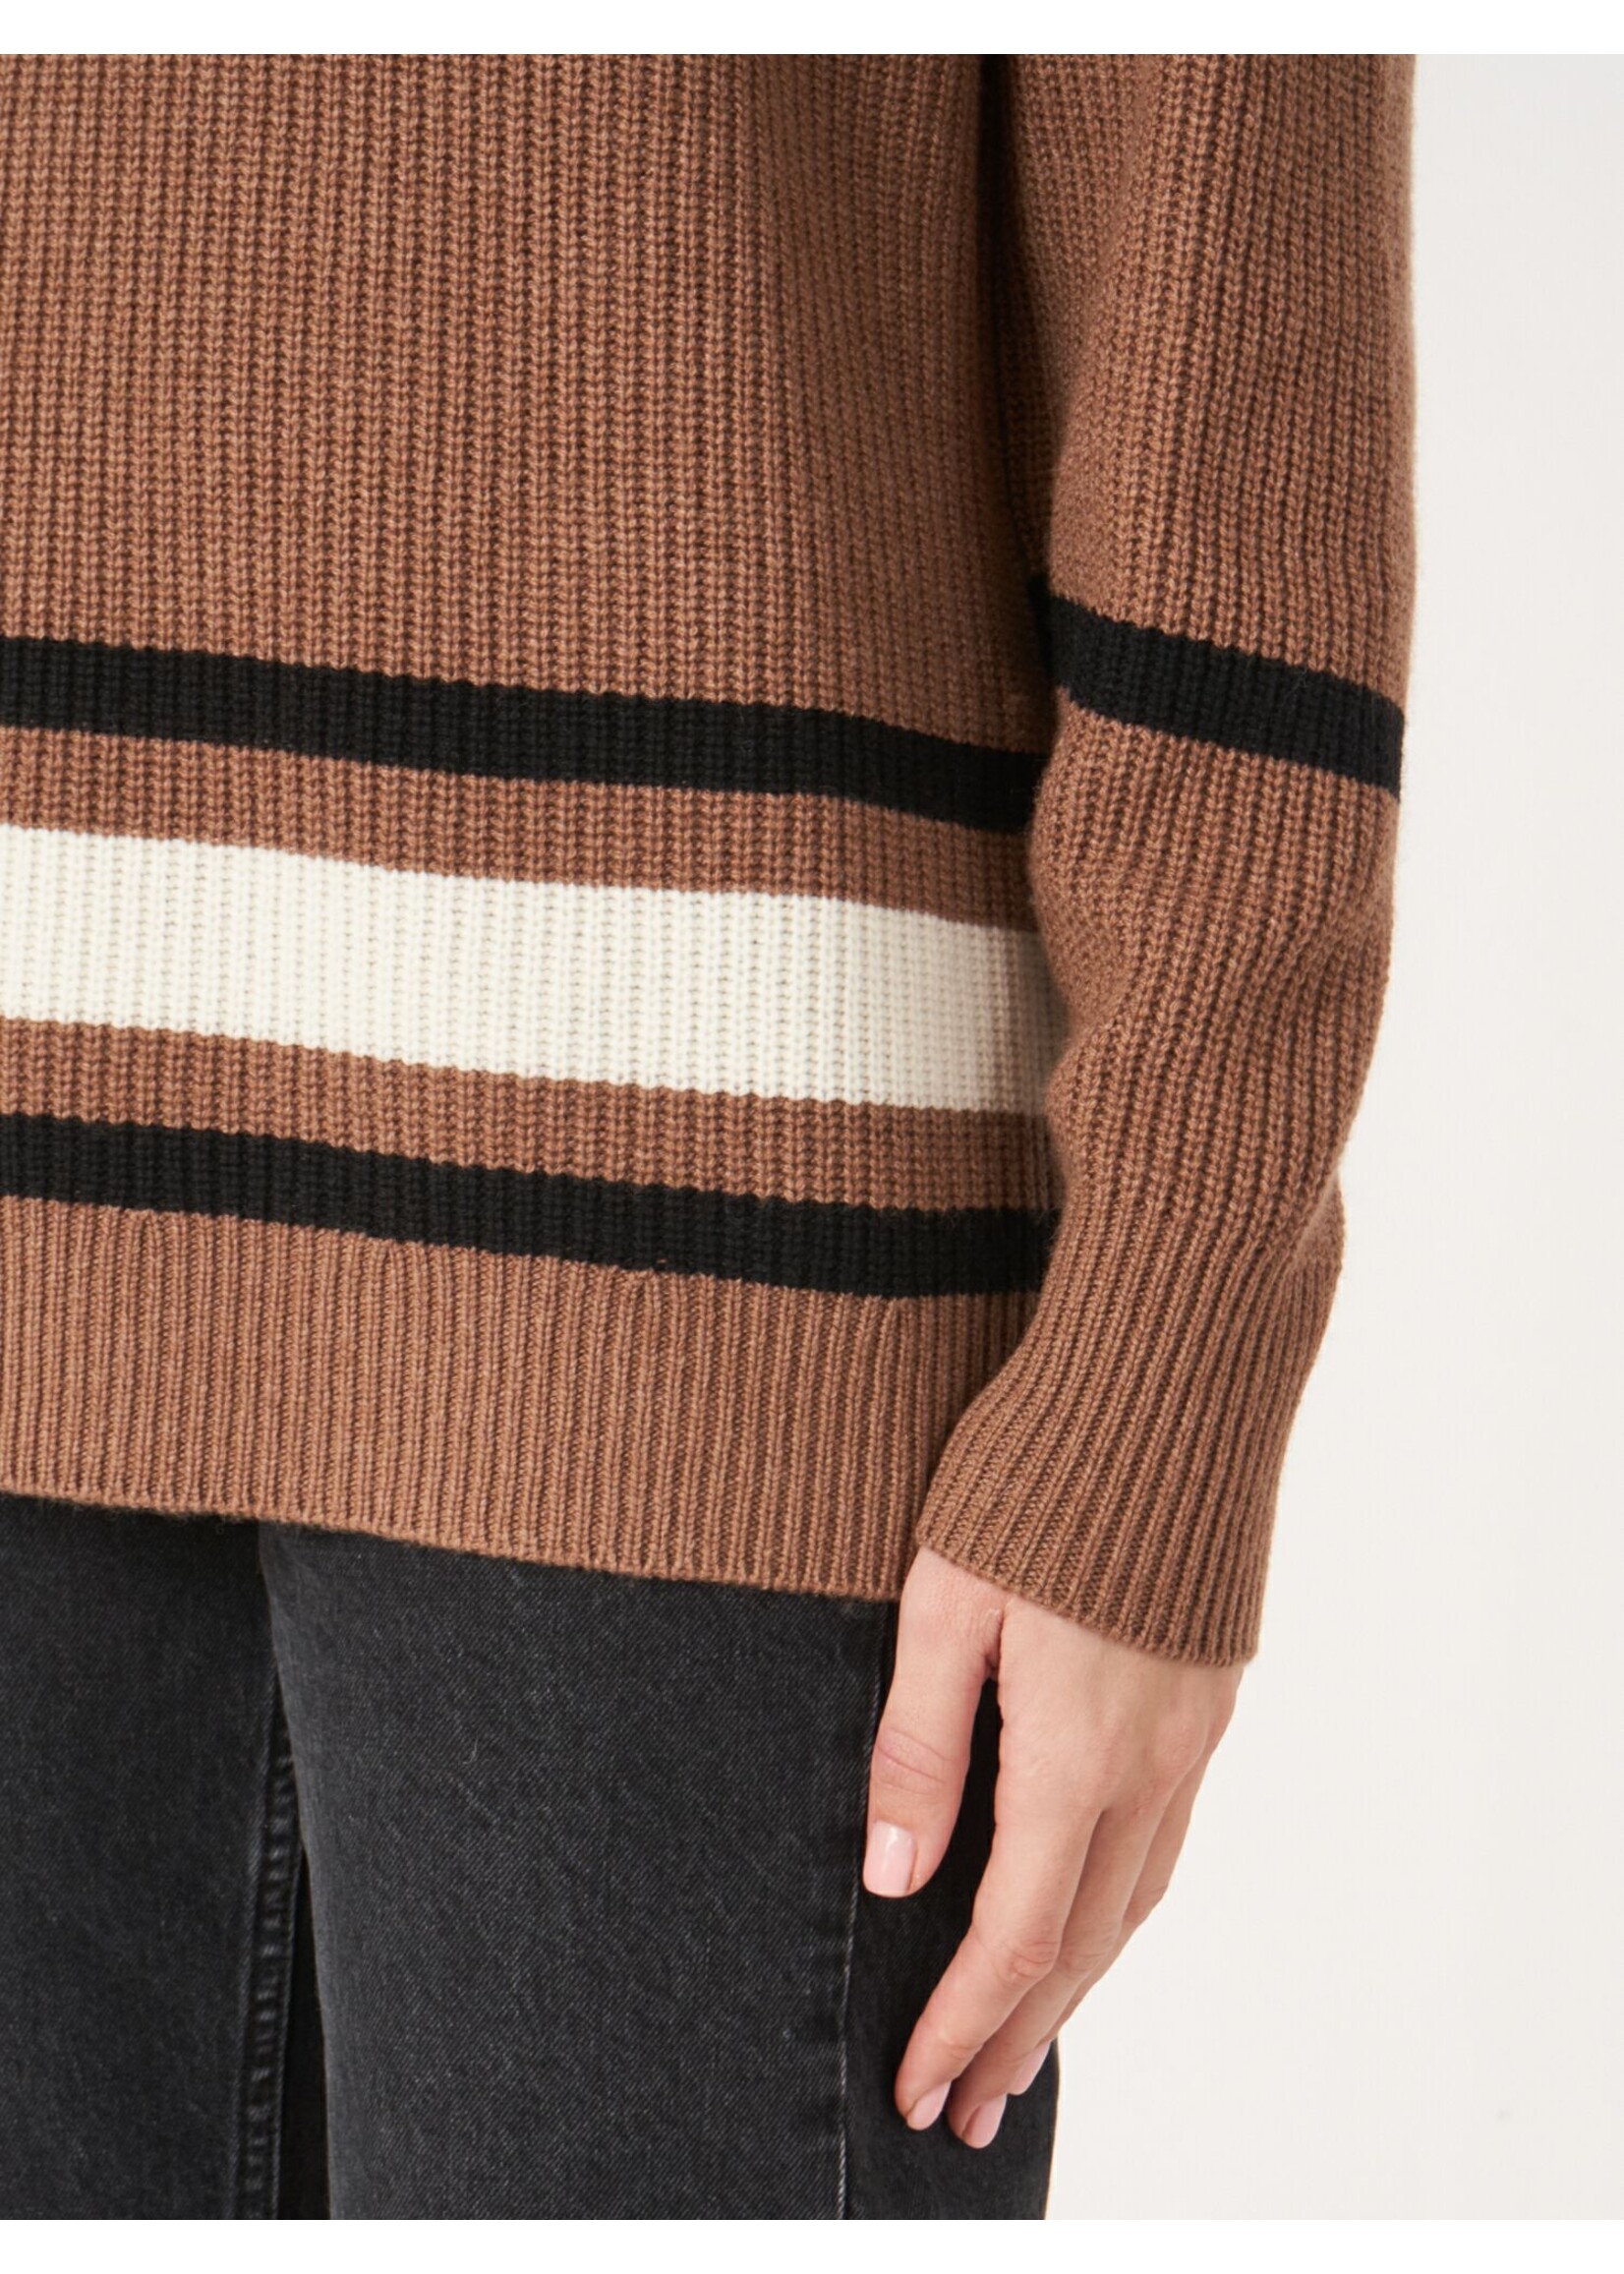 Repeat Repeat - Cashmere Knitted Pullover